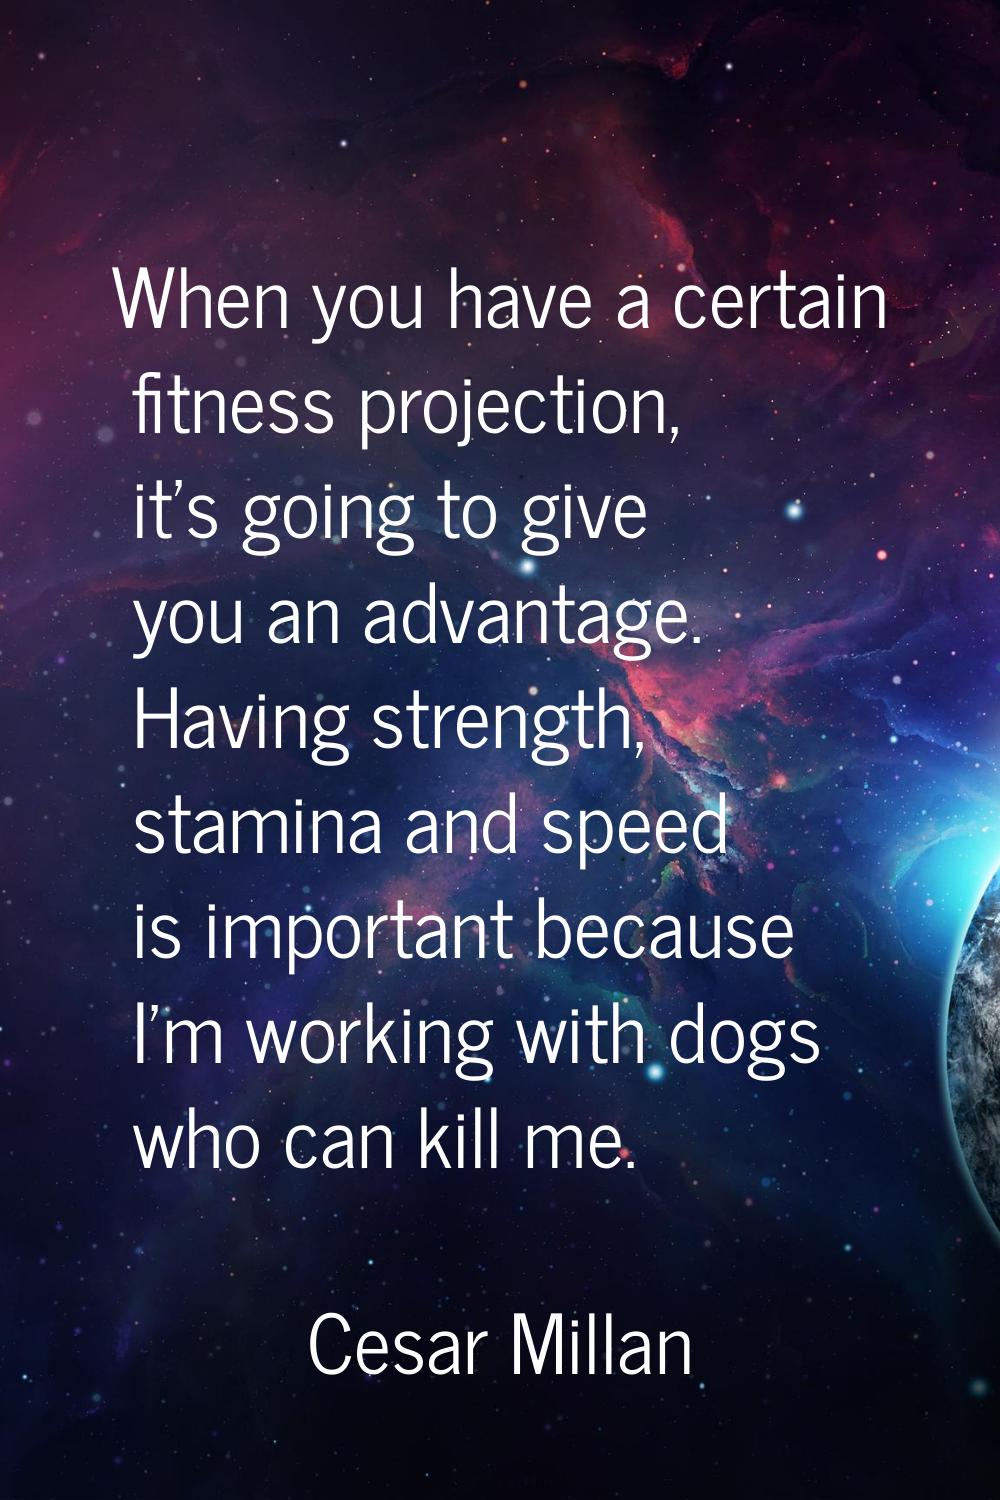 When you have a certain fitness projection, it's going to give you an advantage. Having strength, s